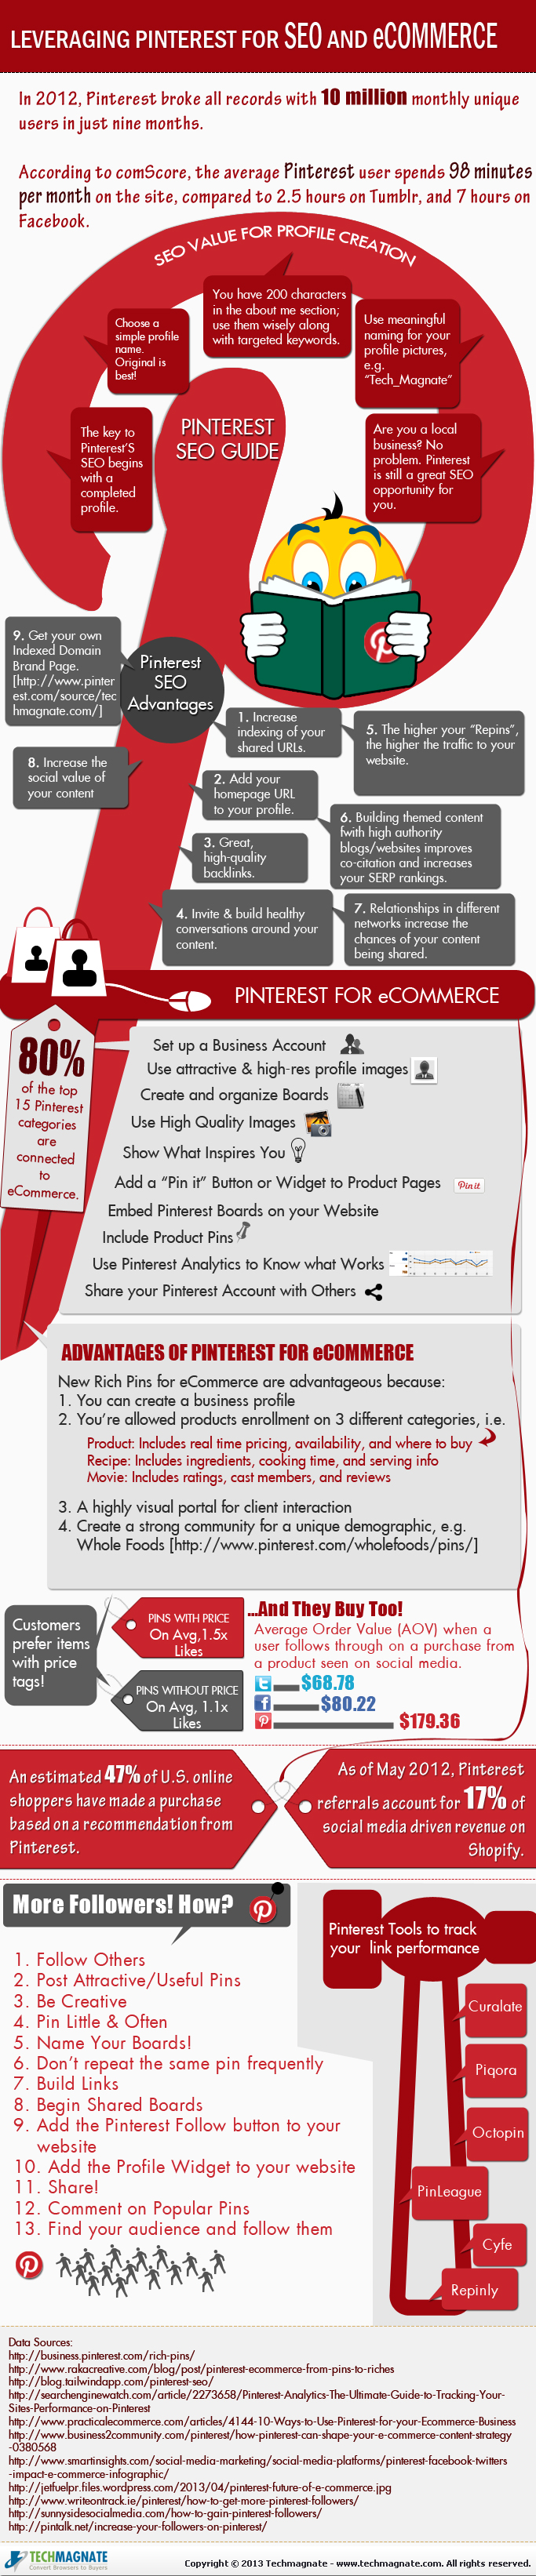 Leverage Pinterest For eCommerce and SEO